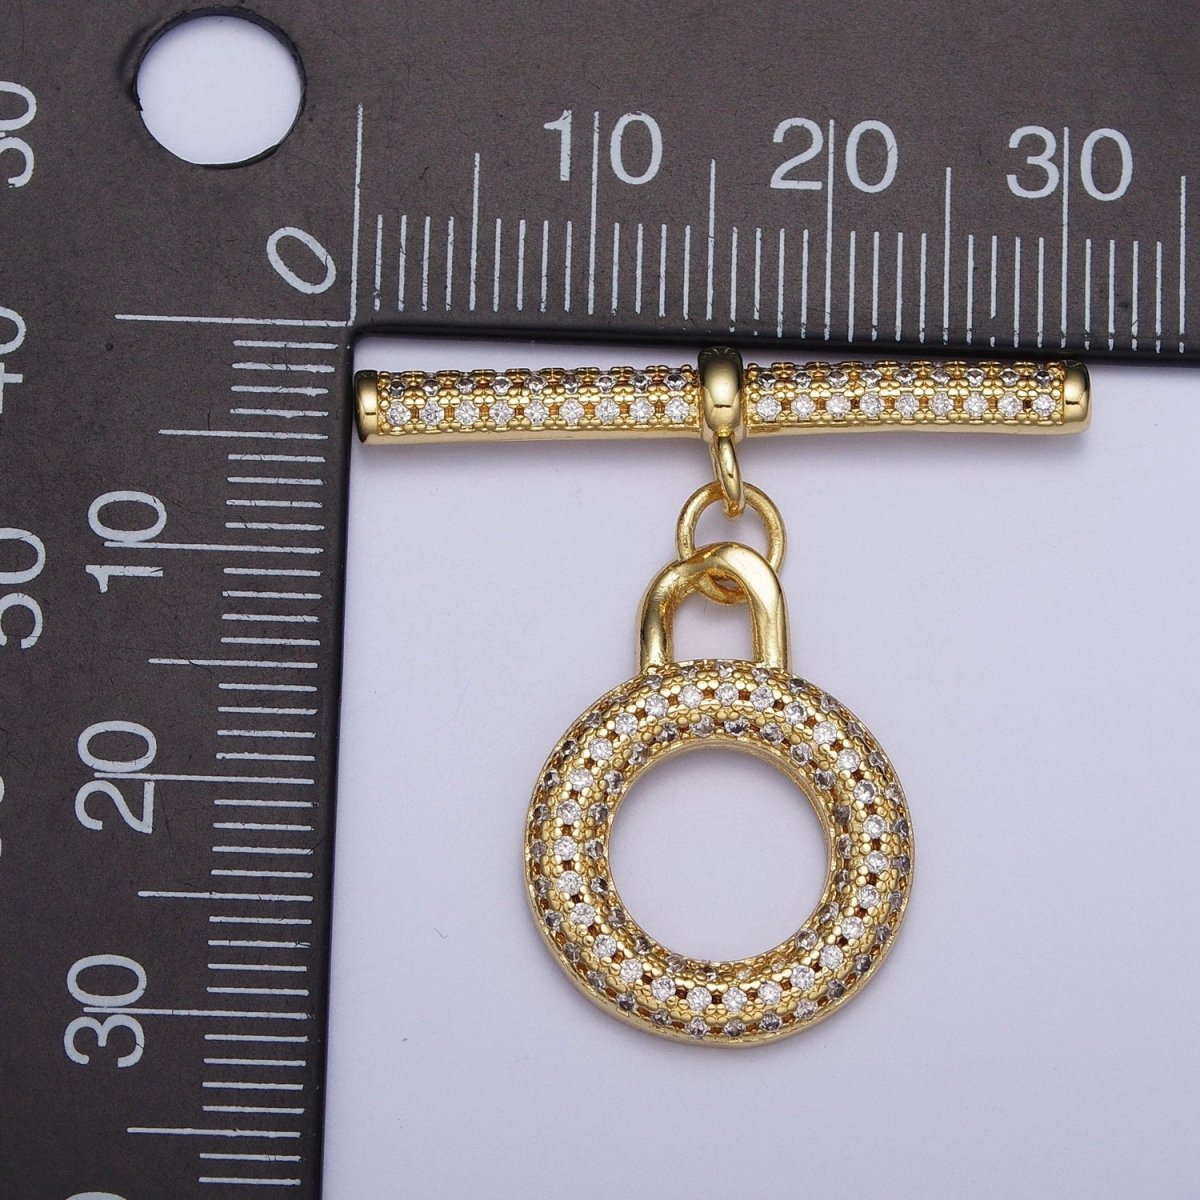 Micro Paved 24K Gold Filled Toggle Clasps For Necklace Bracelet Findings L-920 - DLUXCA